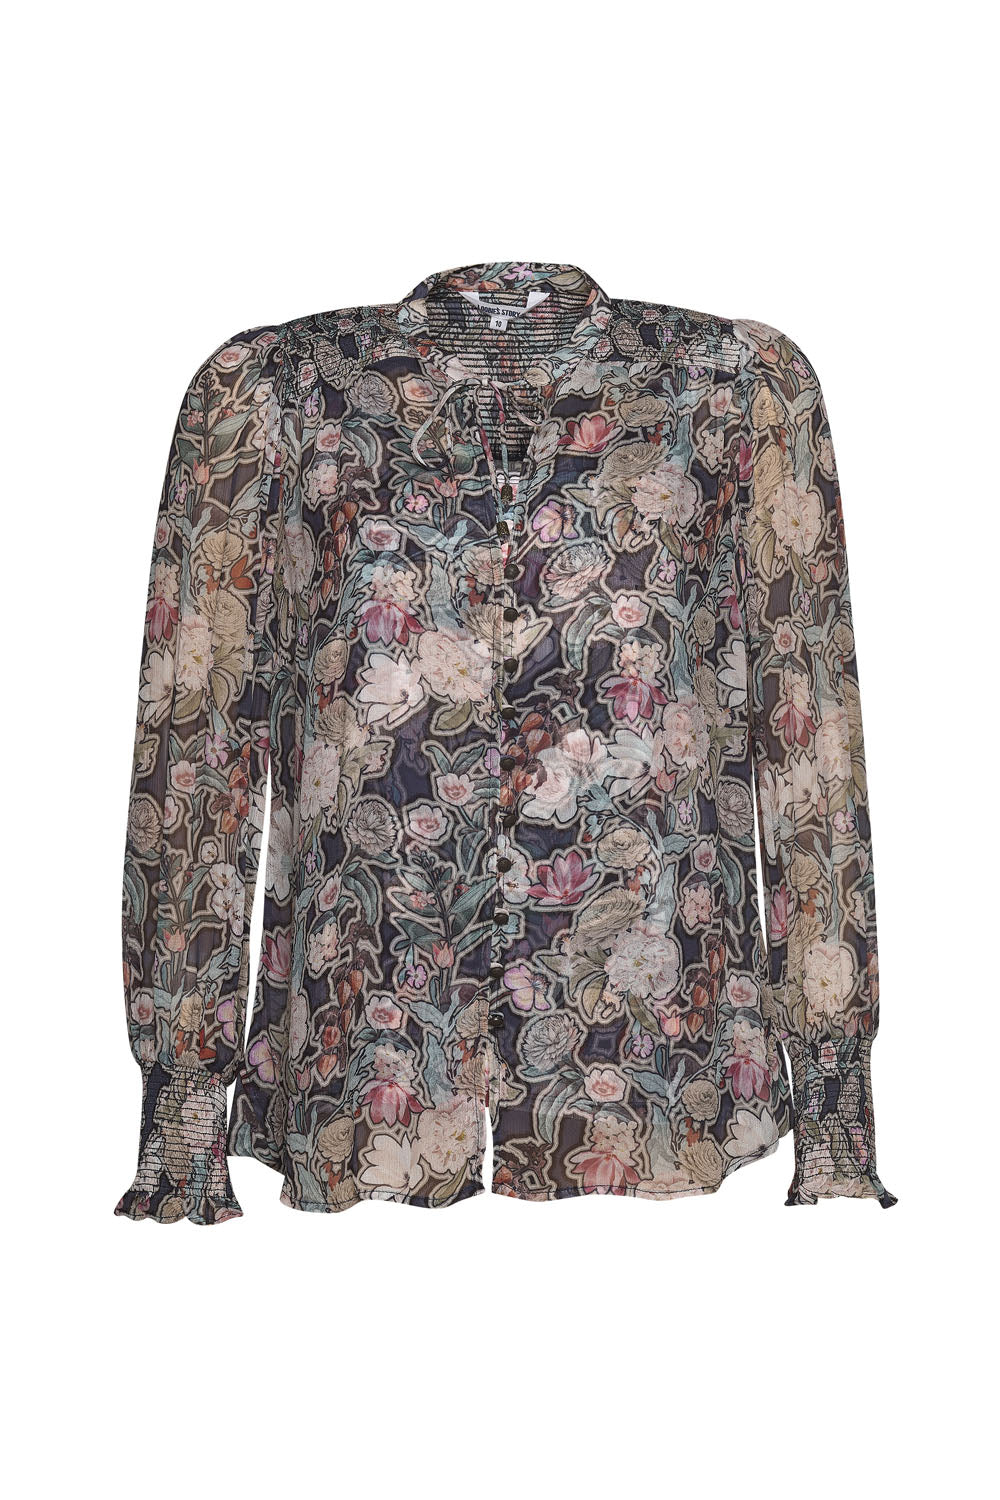 LOOBIE'S STORY LEGACY BLOUSE - THE VOGUE STORE